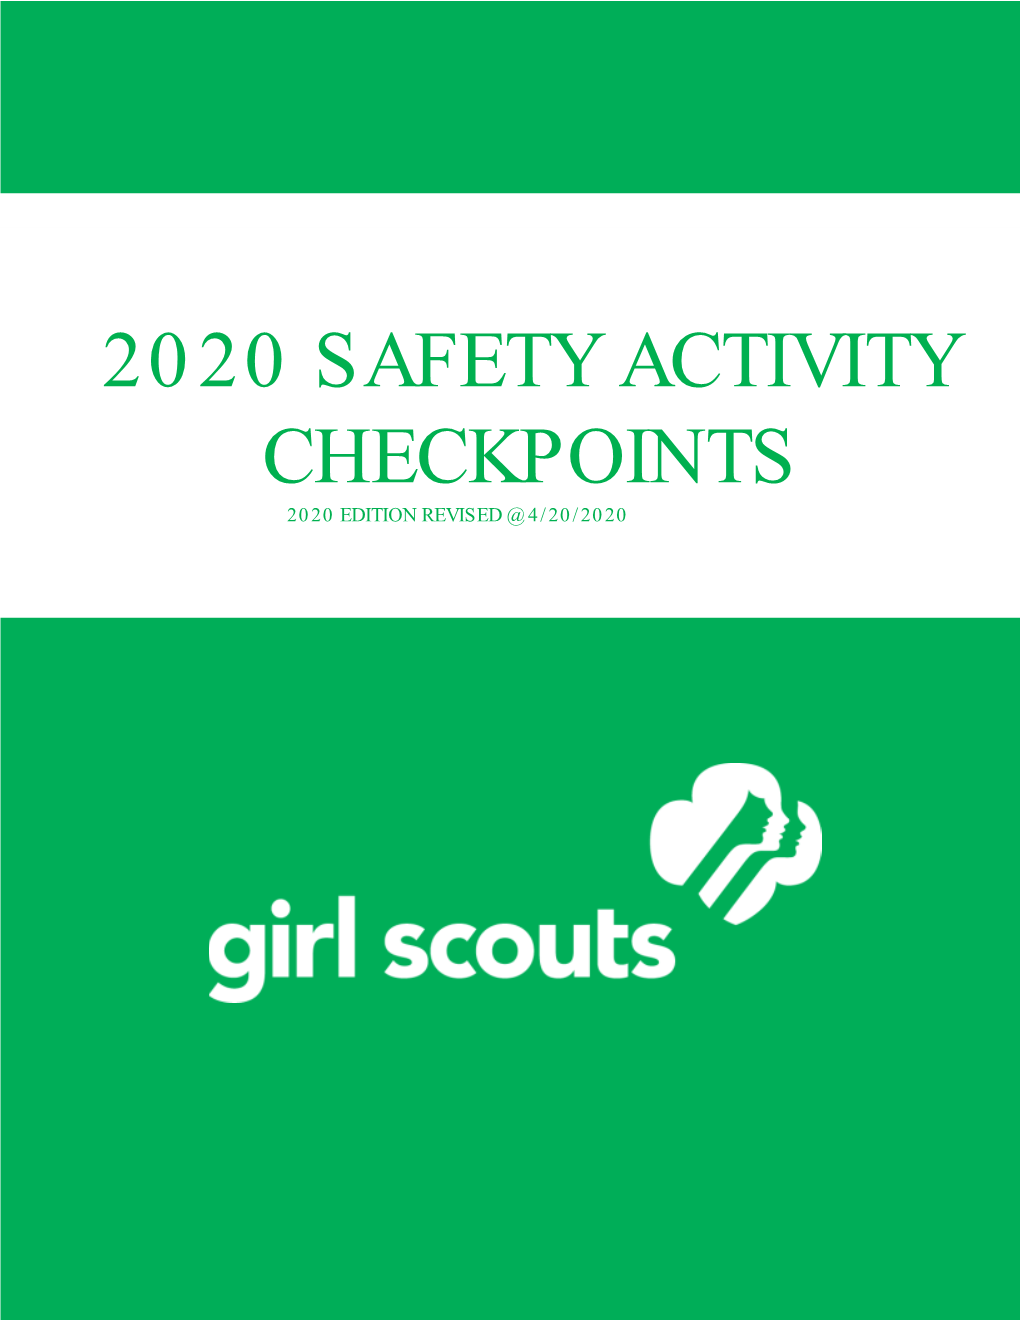 Safety Activity Checkpoints 2020 Edition Revised @ 4/20/2020